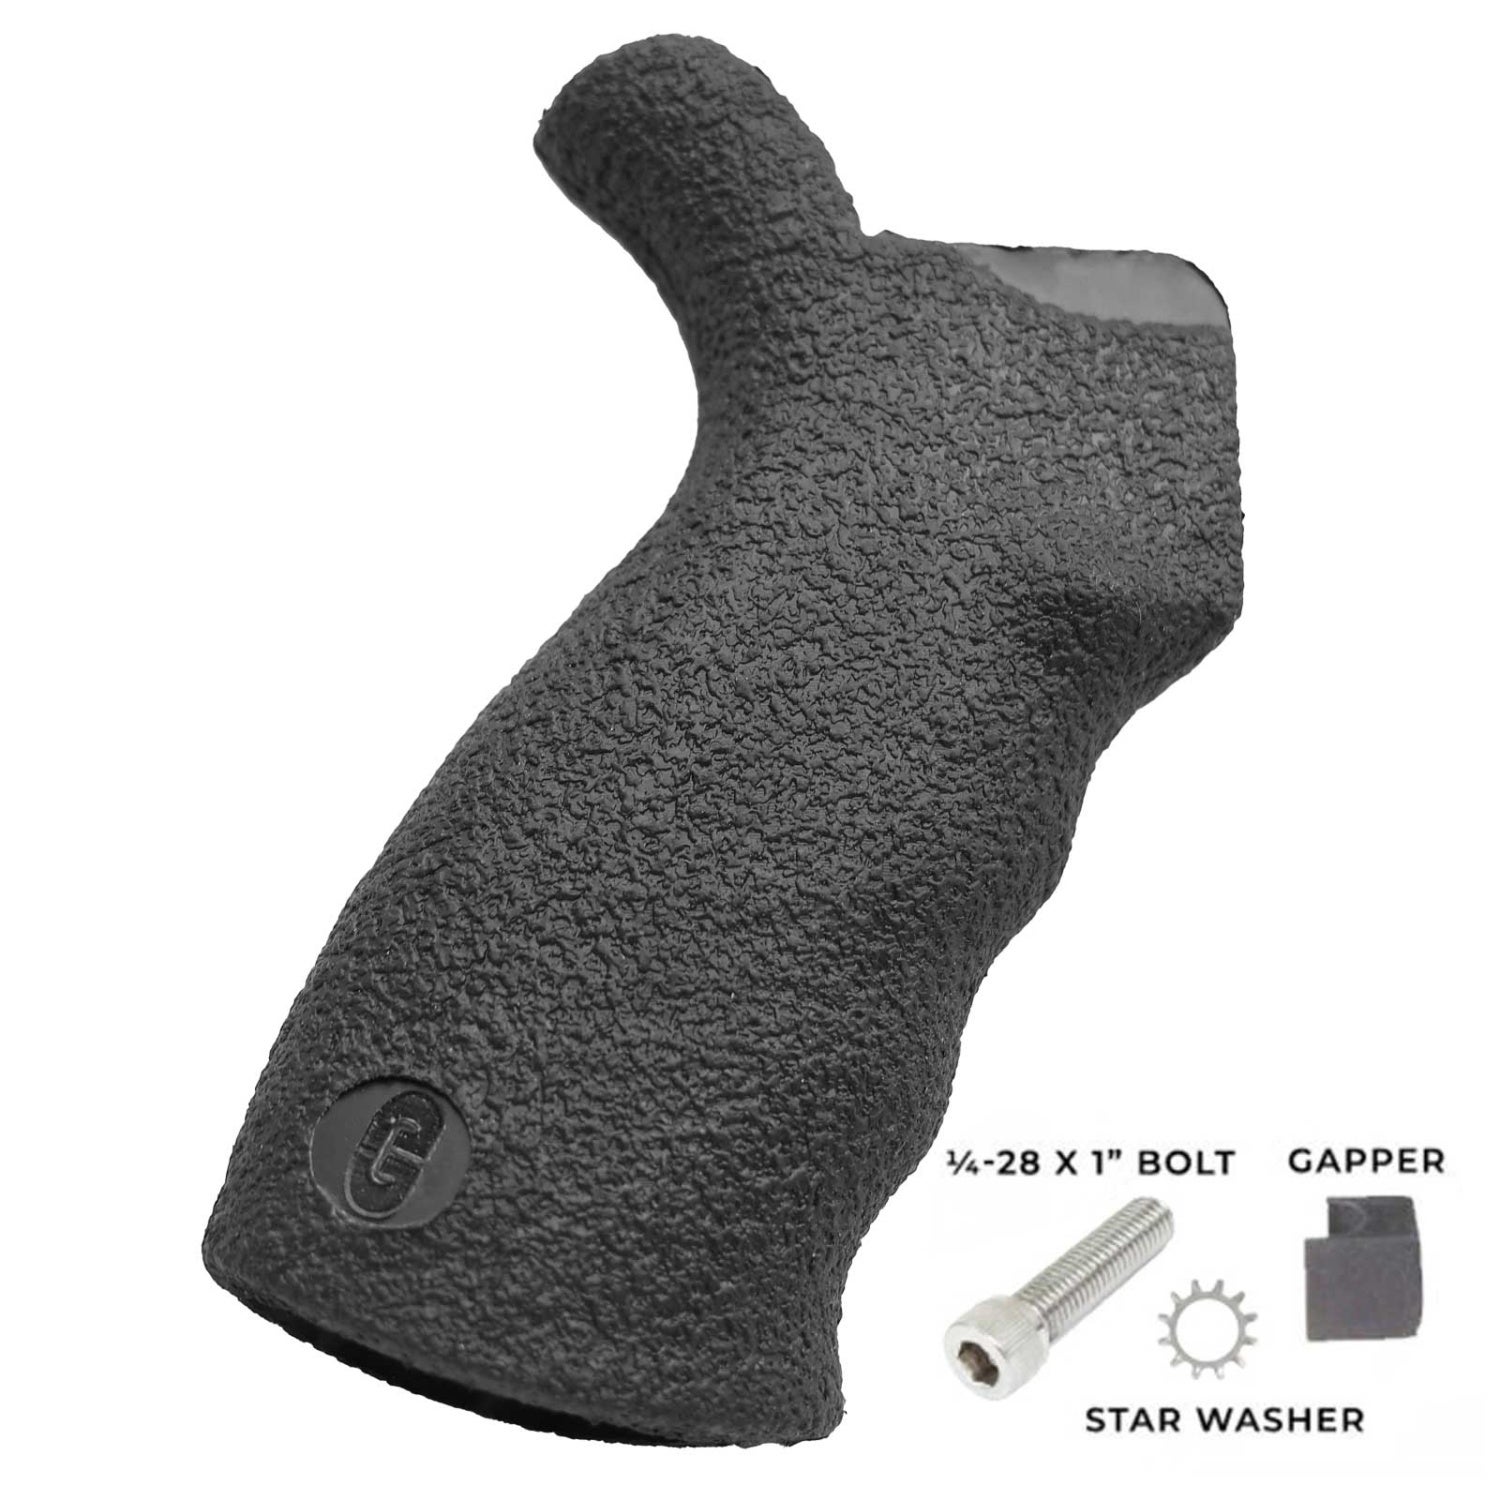 New AR-15 Handguards And Grips From Ergo -The Firearm Blog | Tactical ...